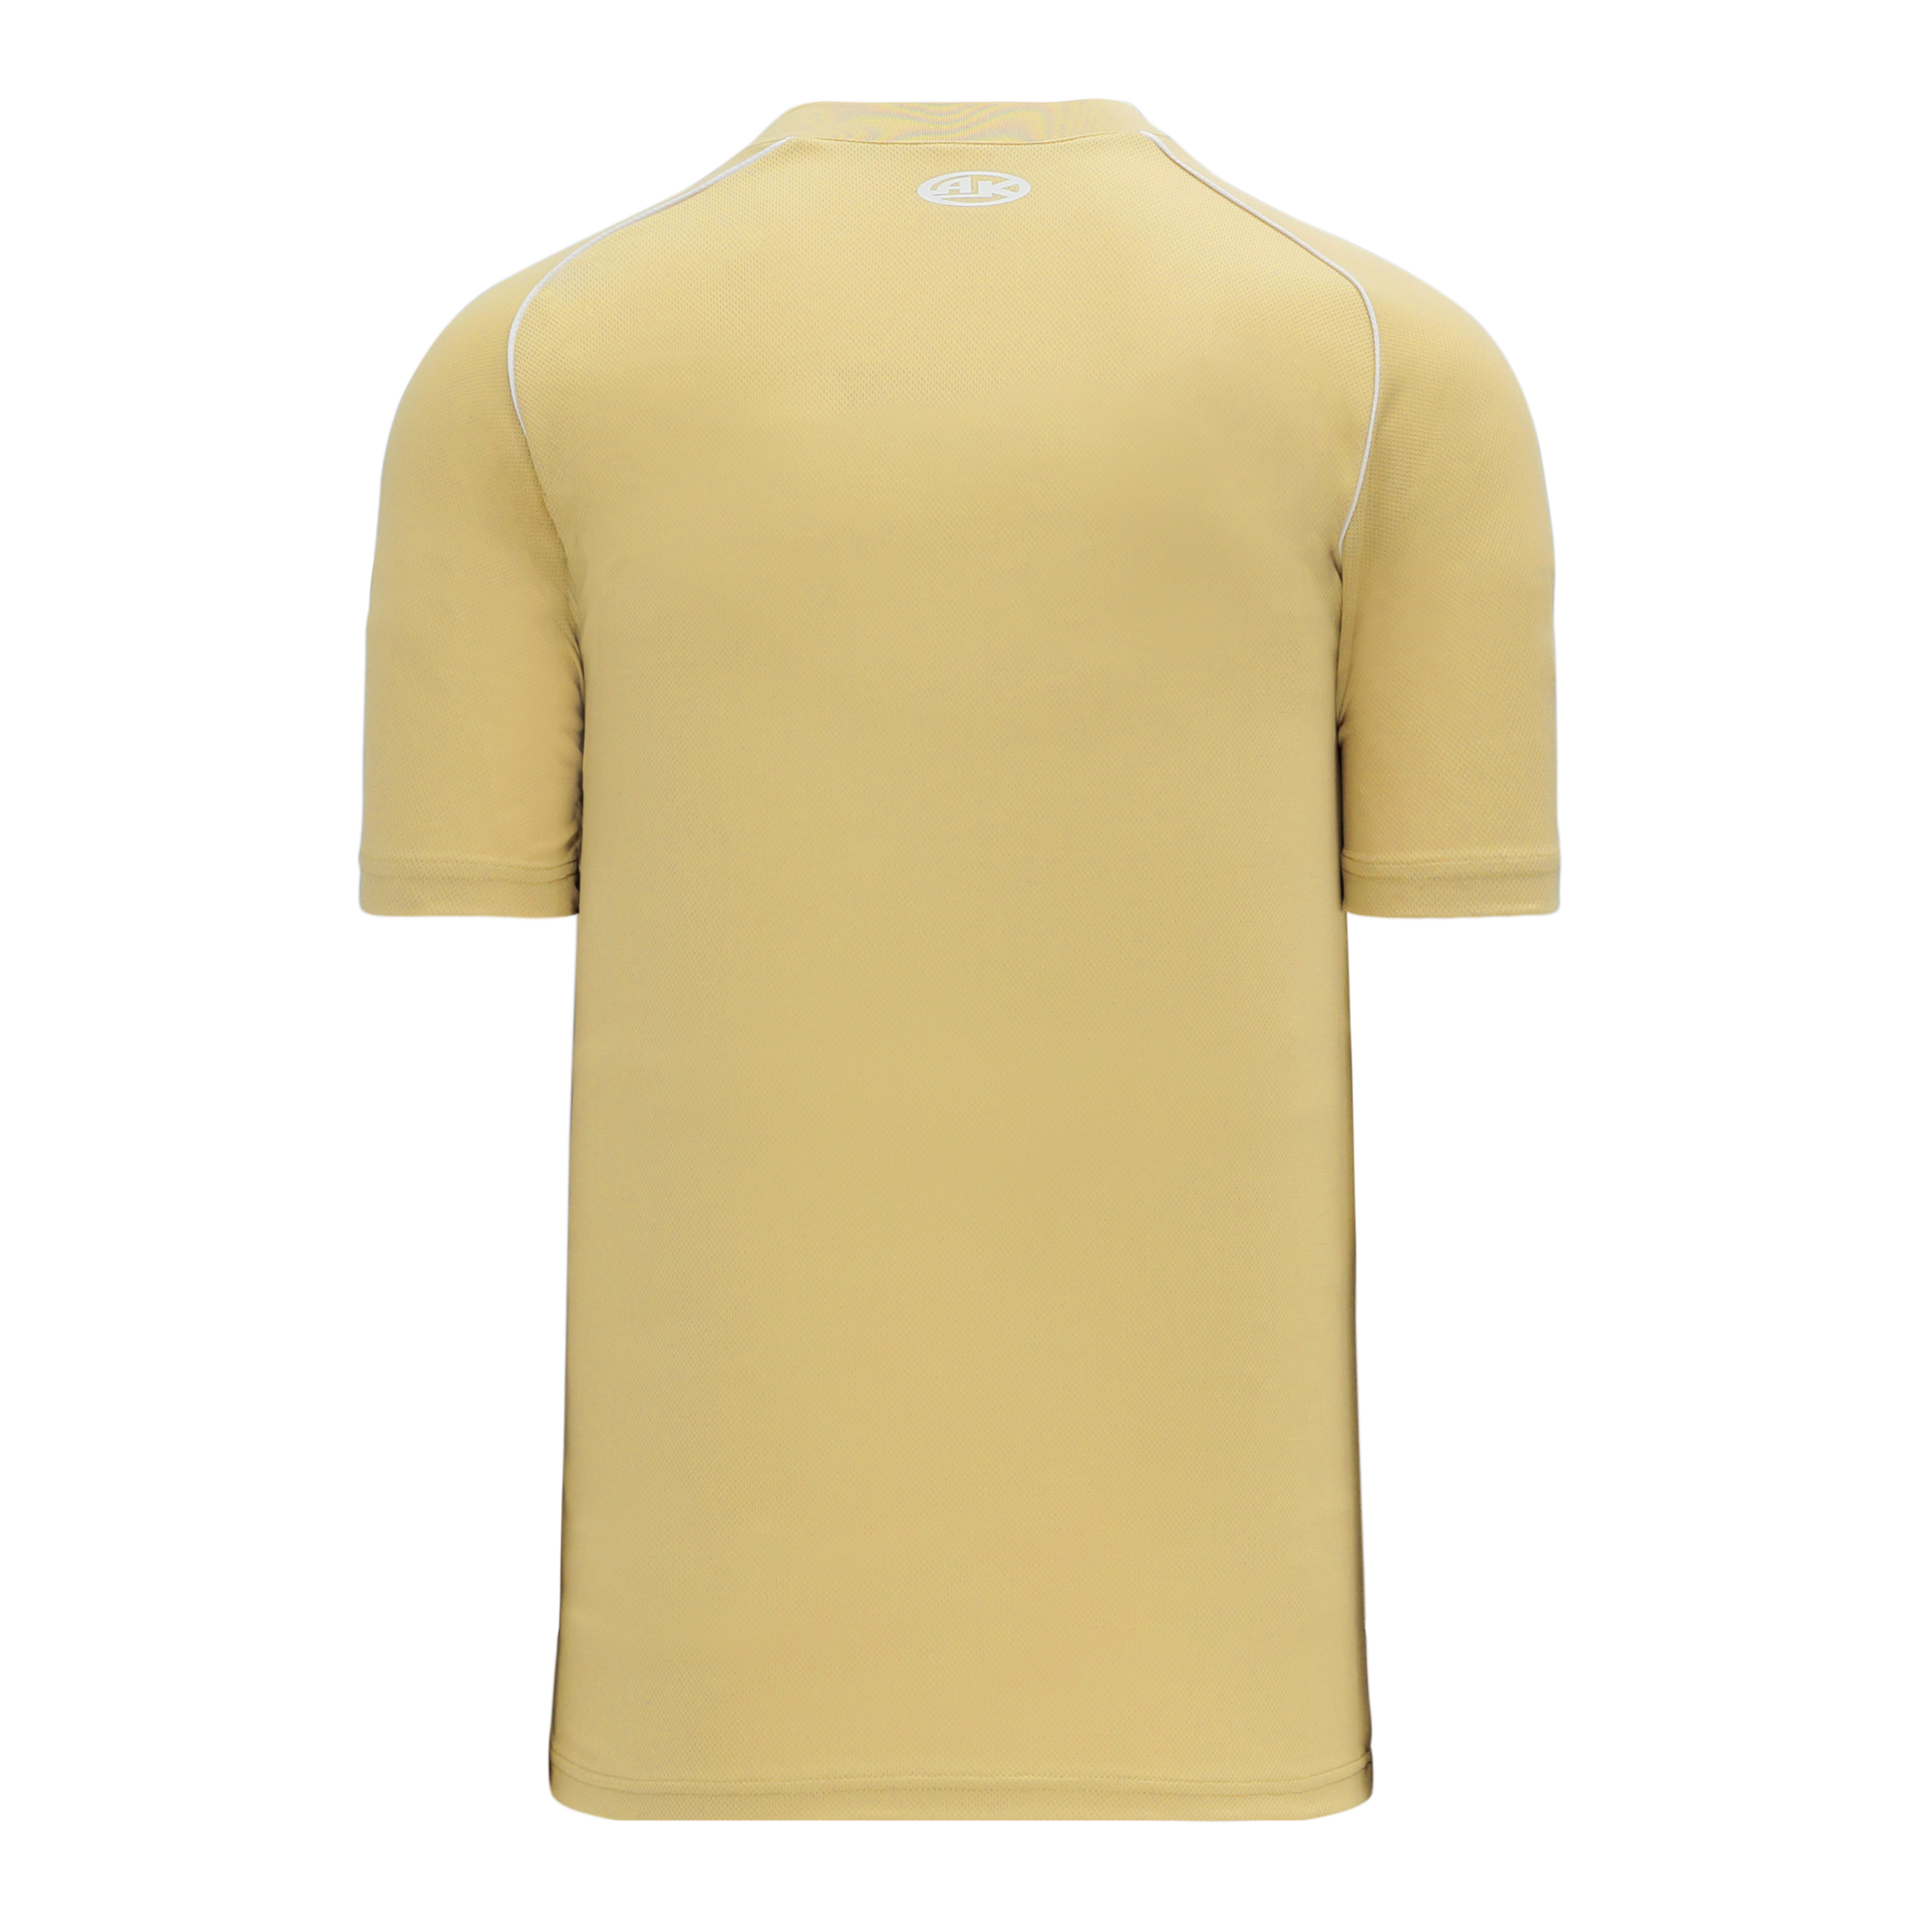 Athletic Knit (AK) S1333Y-439 Youth Dark Green/Gold/White Soccer Jersey X-Large